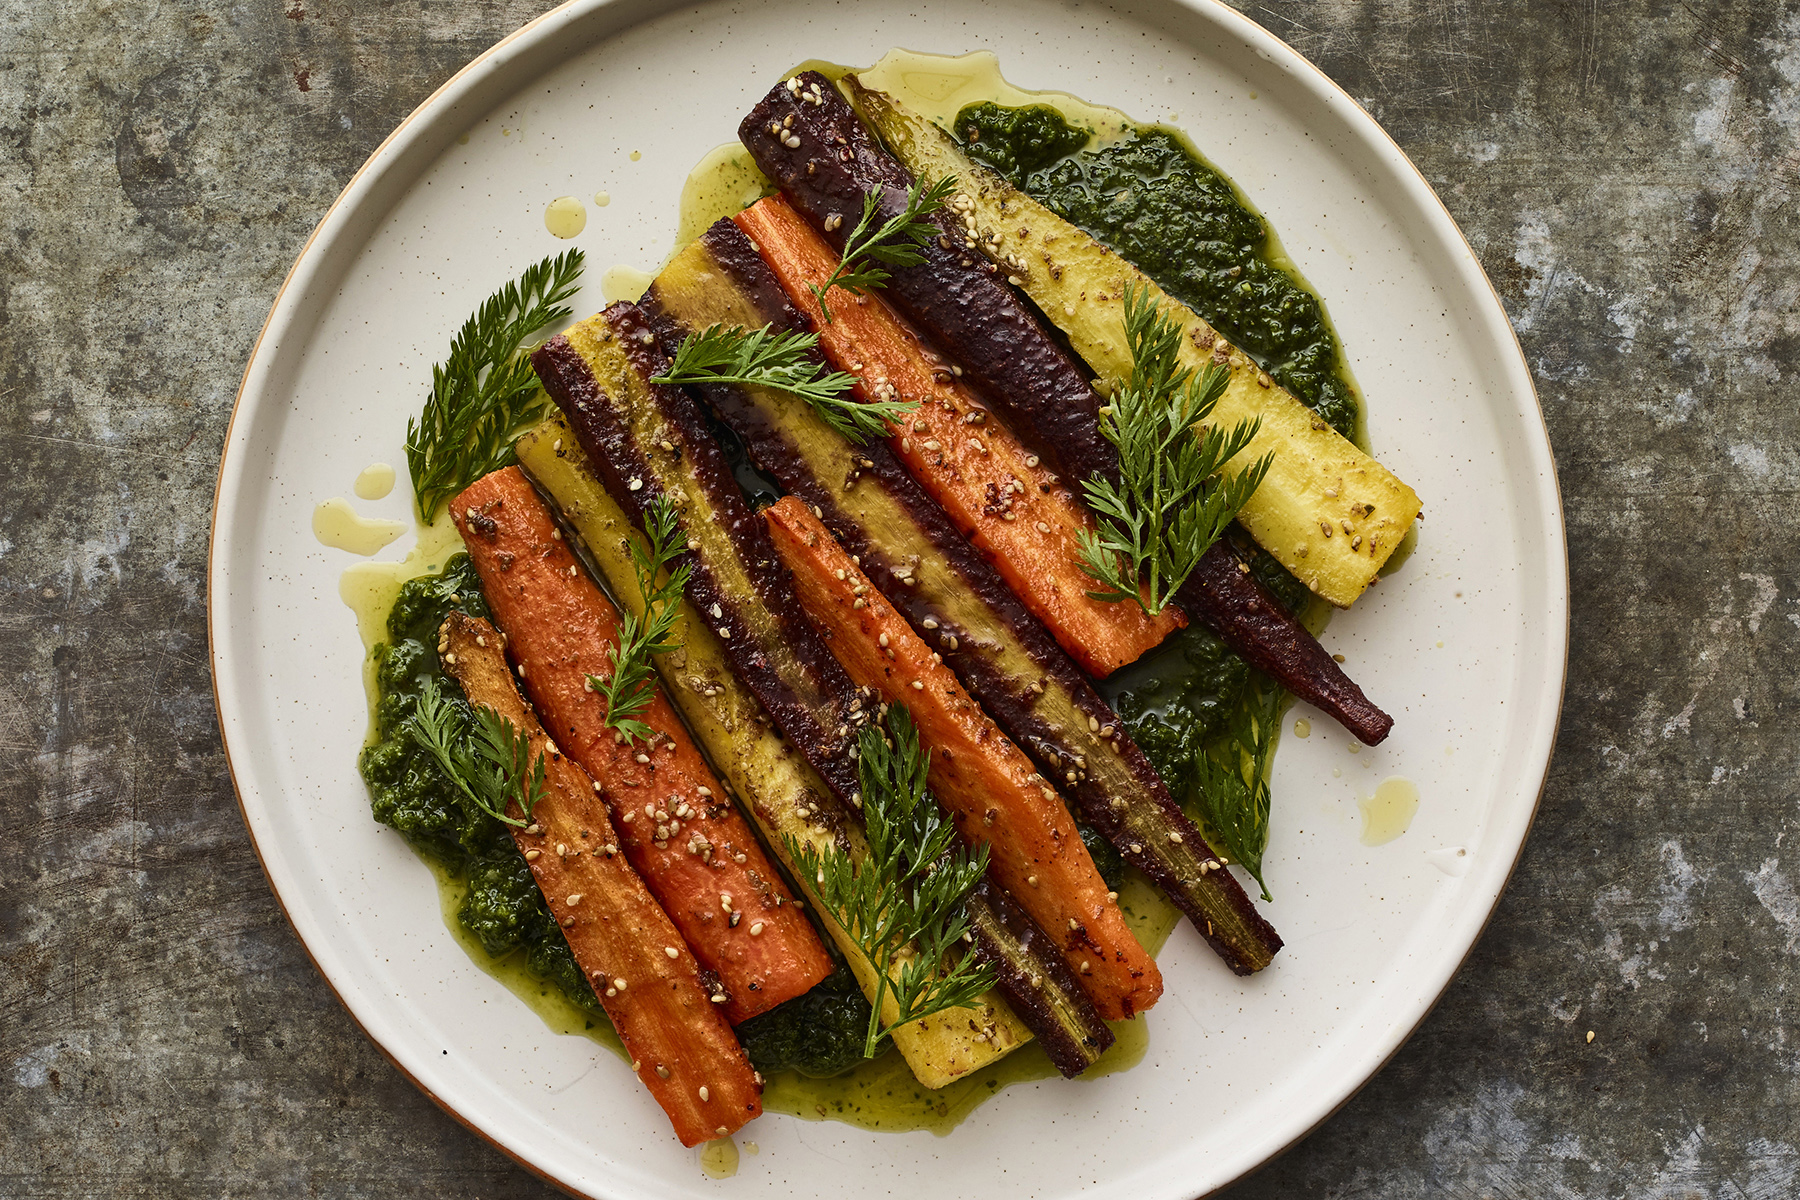 Carrot sticks with zatar and tahini dressing